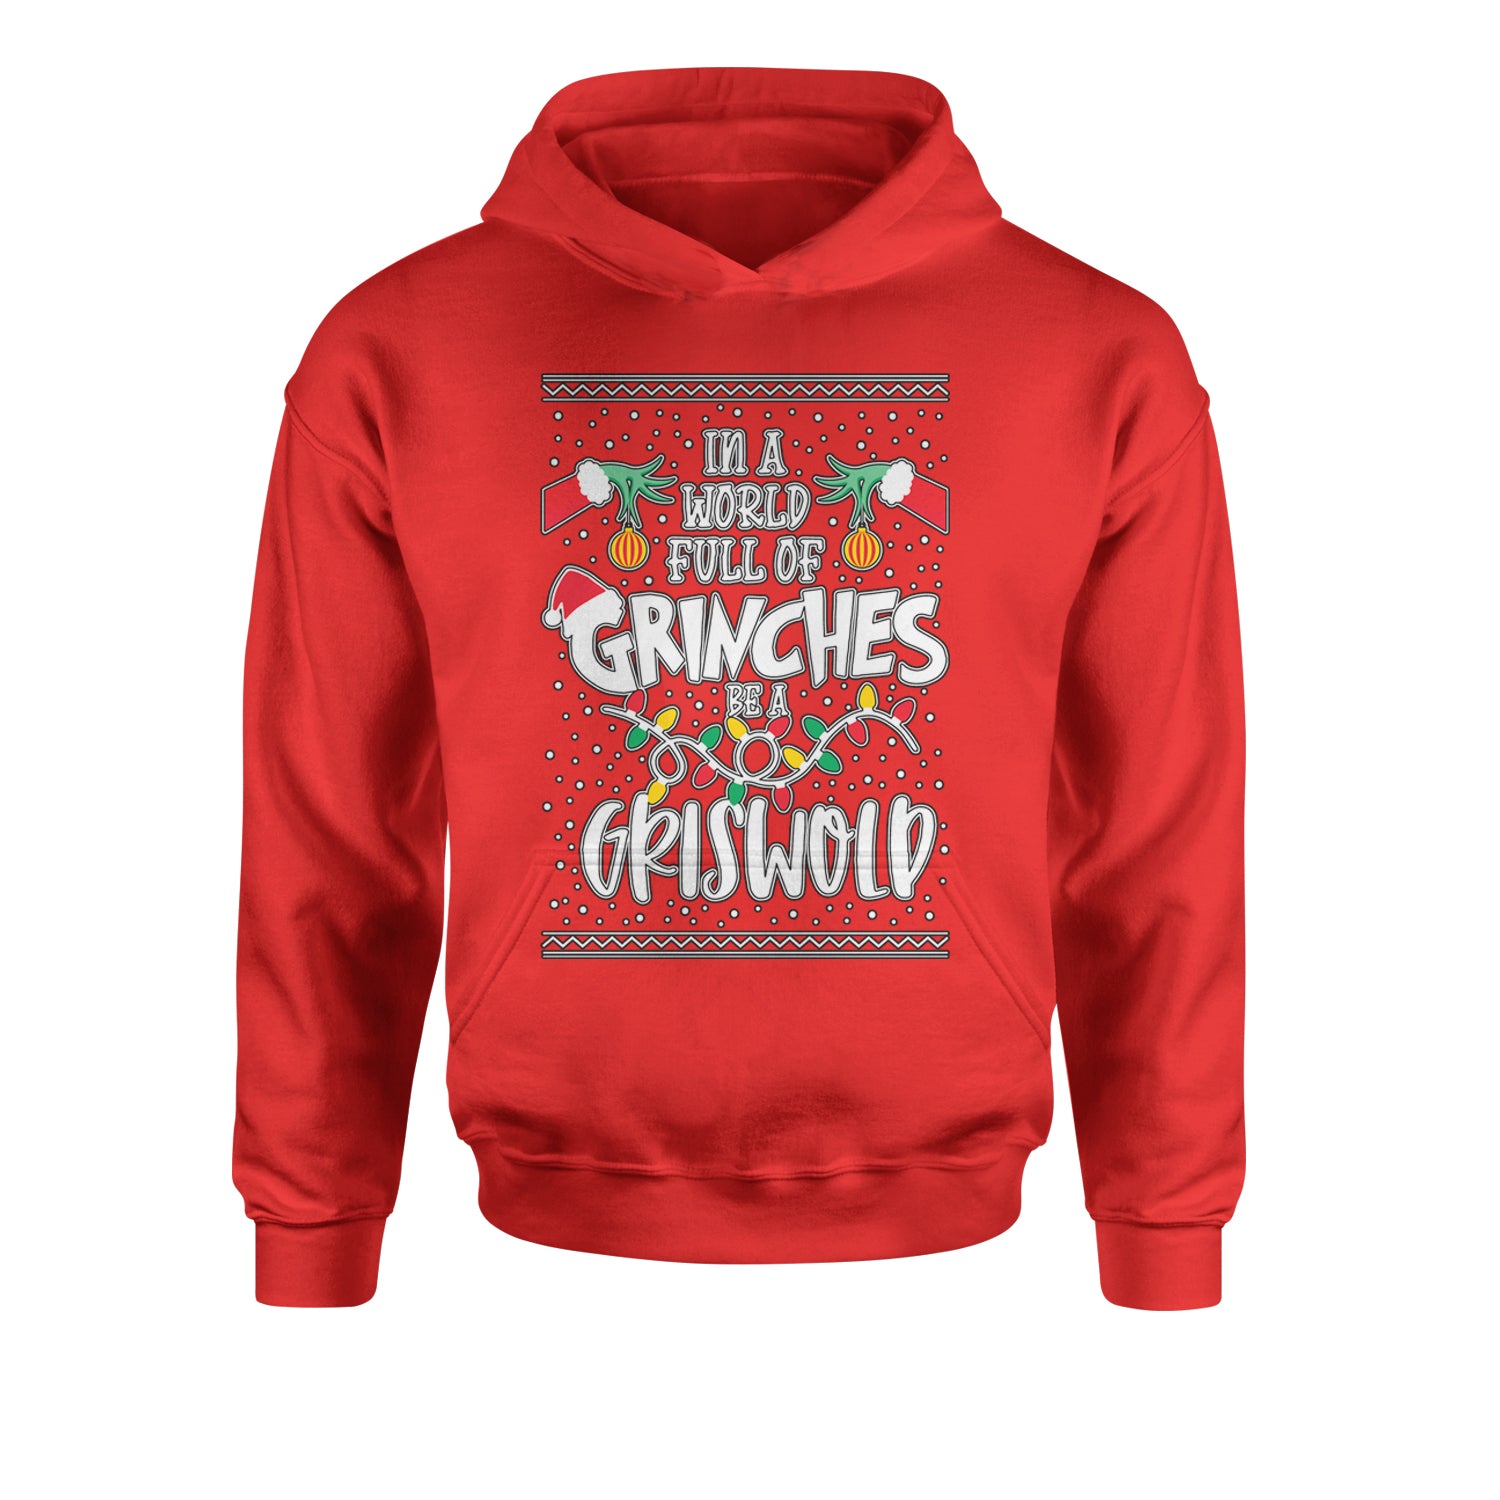 In A World Full Of Grinches, Be A Griswold Youth-Sized Hoodie clark, griswold, lampoon, margot by Expression Tees